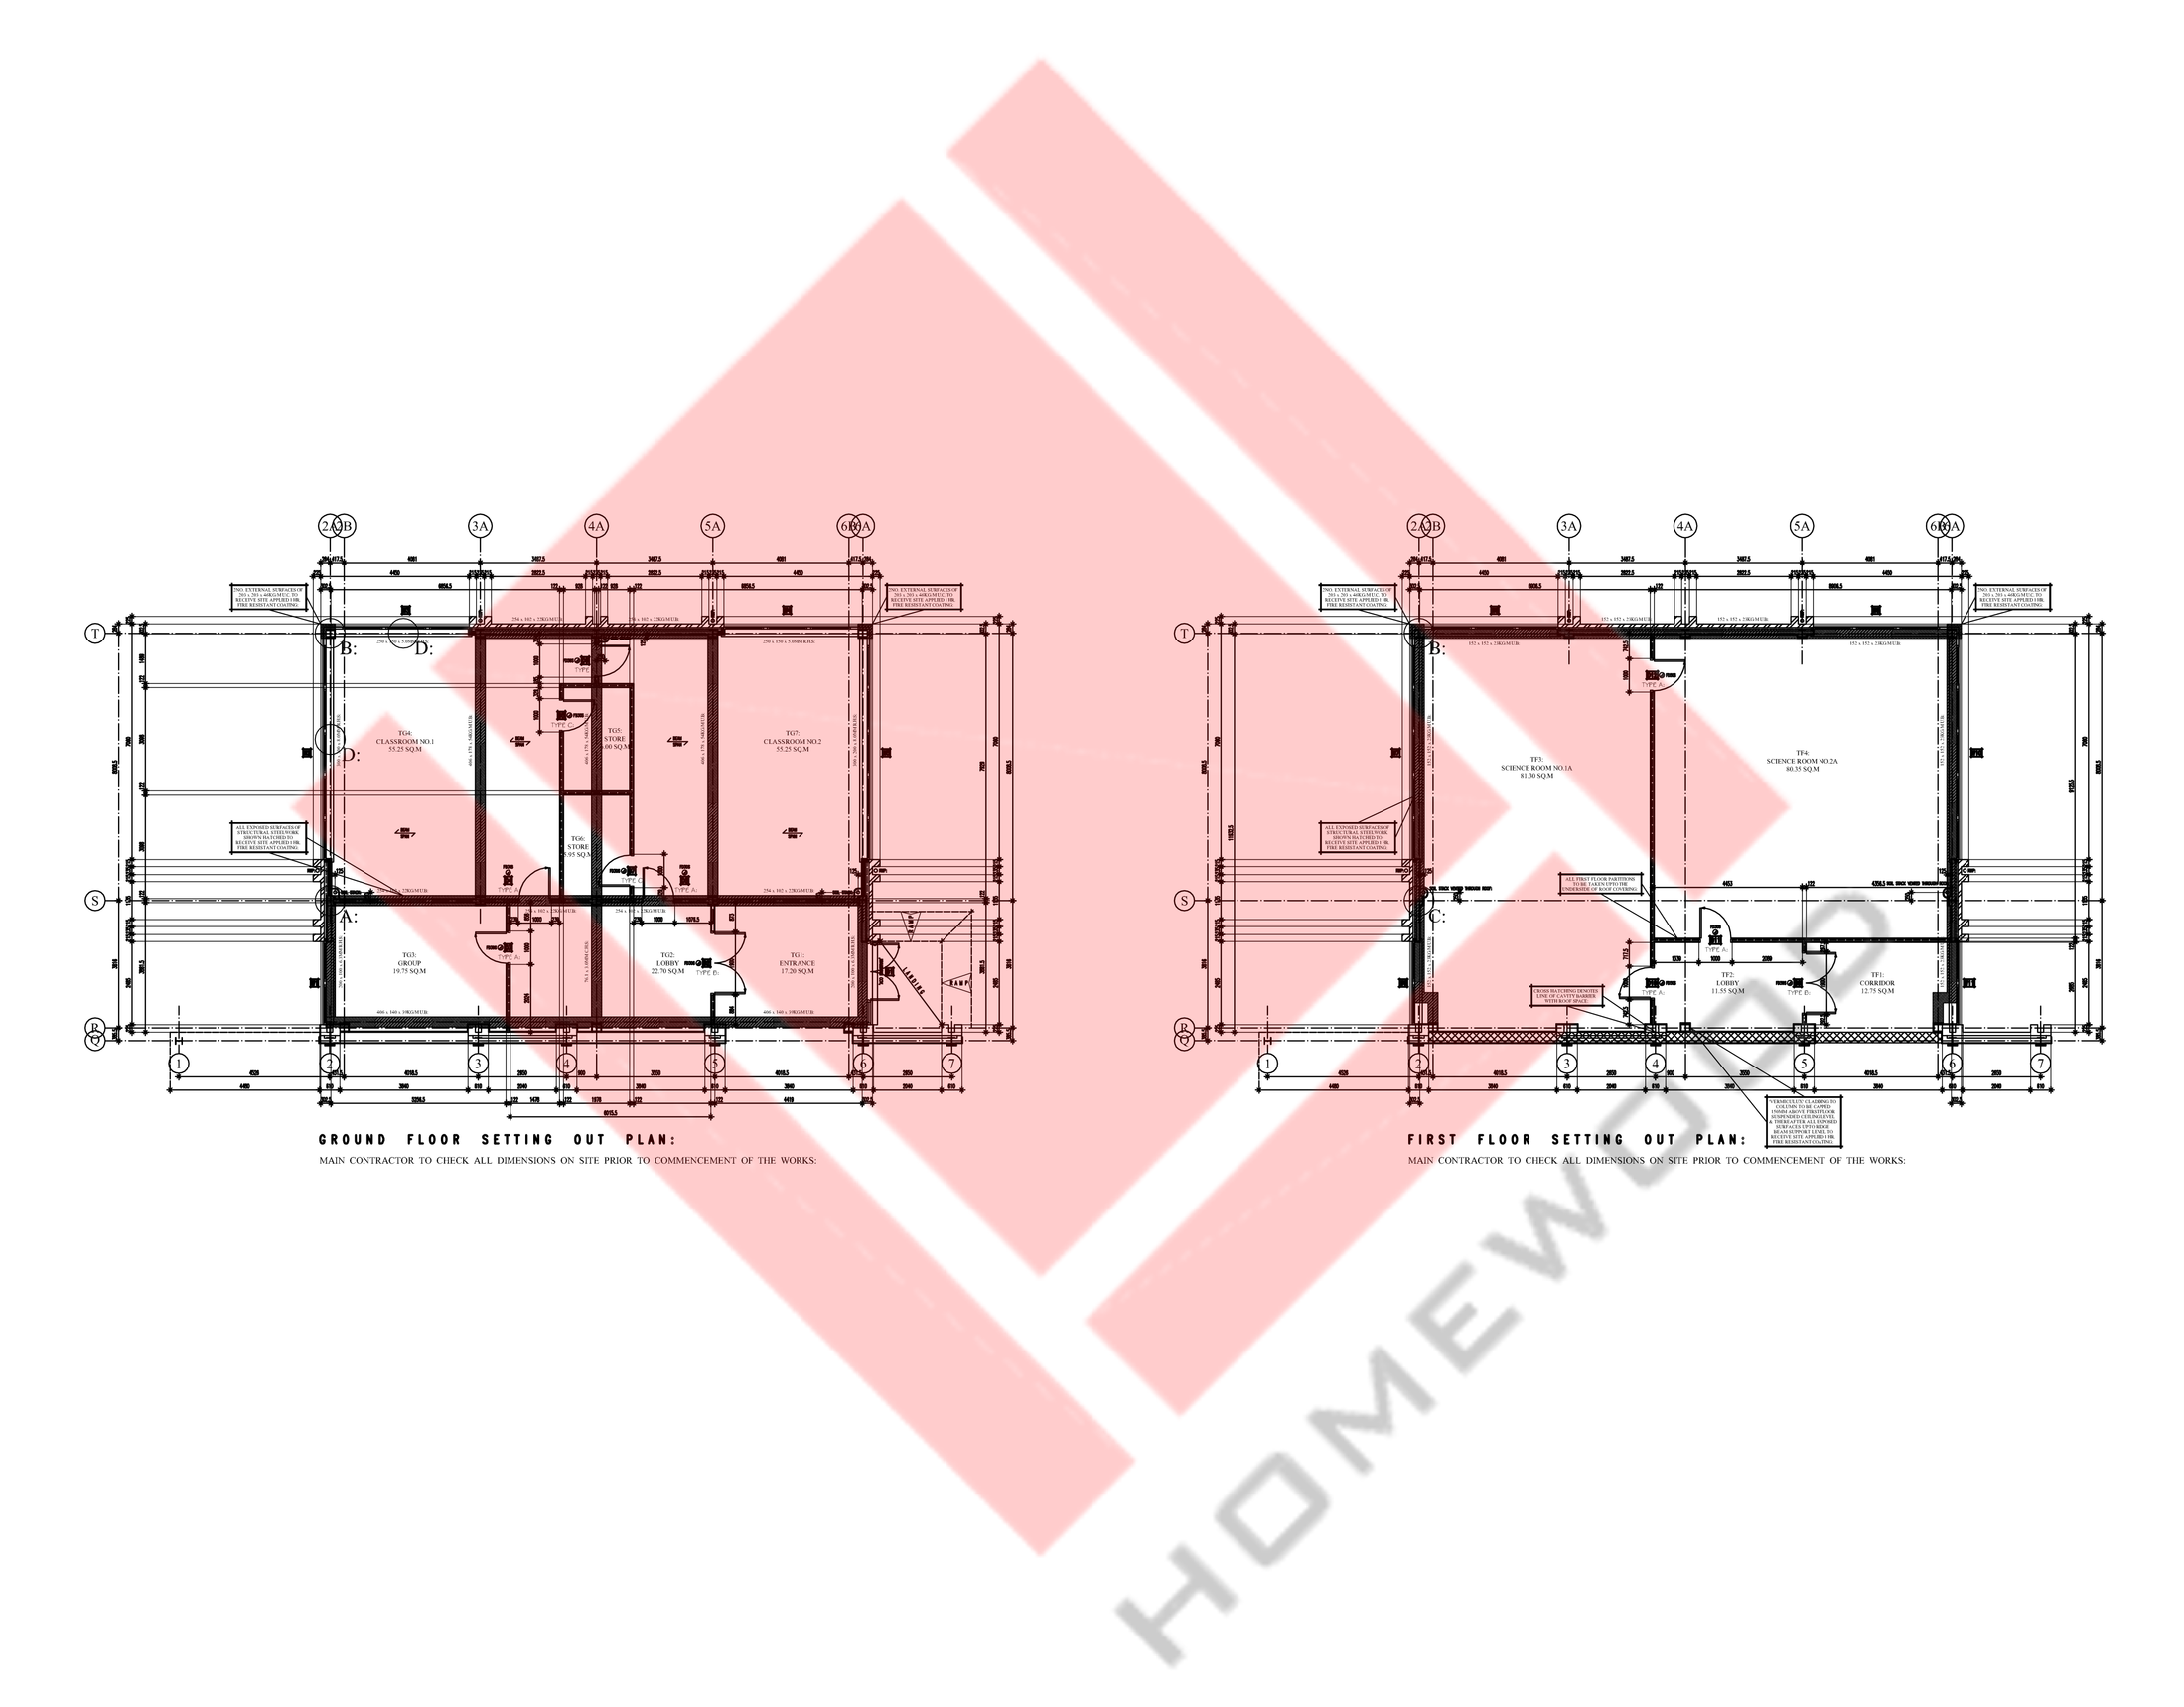 01 Floor Plans.Image.Marked_1.png